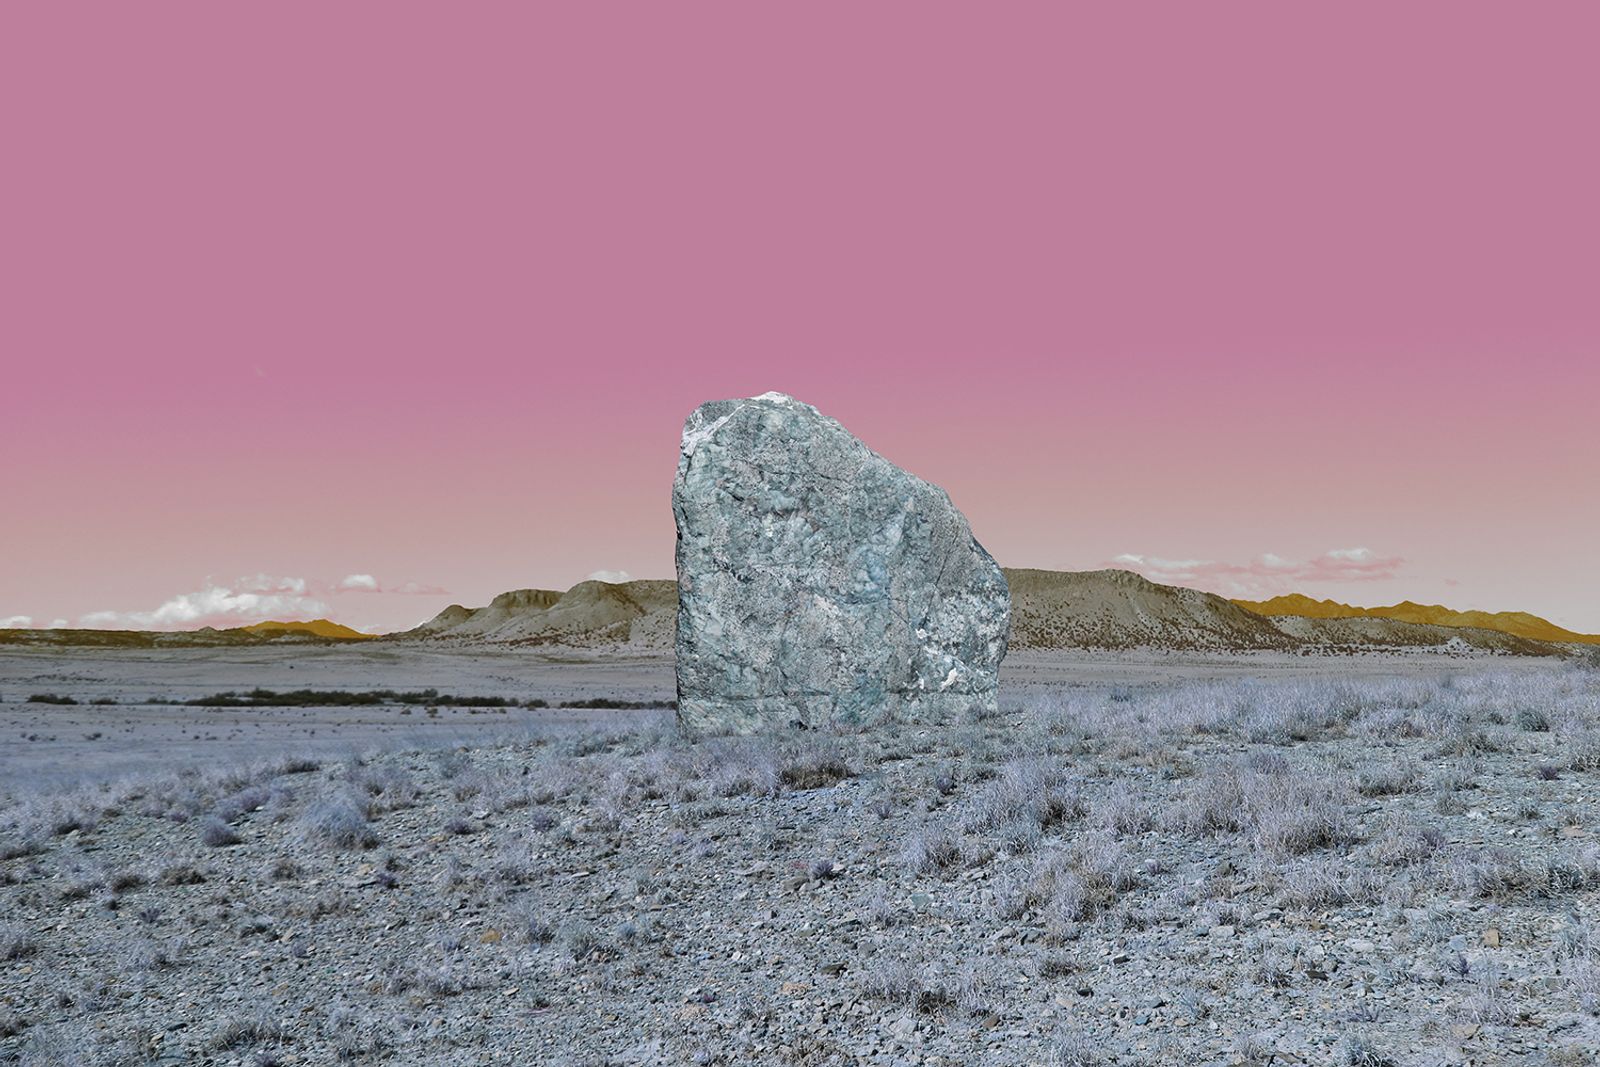 © Ellen Jantzen - Image from the Unexpected Geology photography project